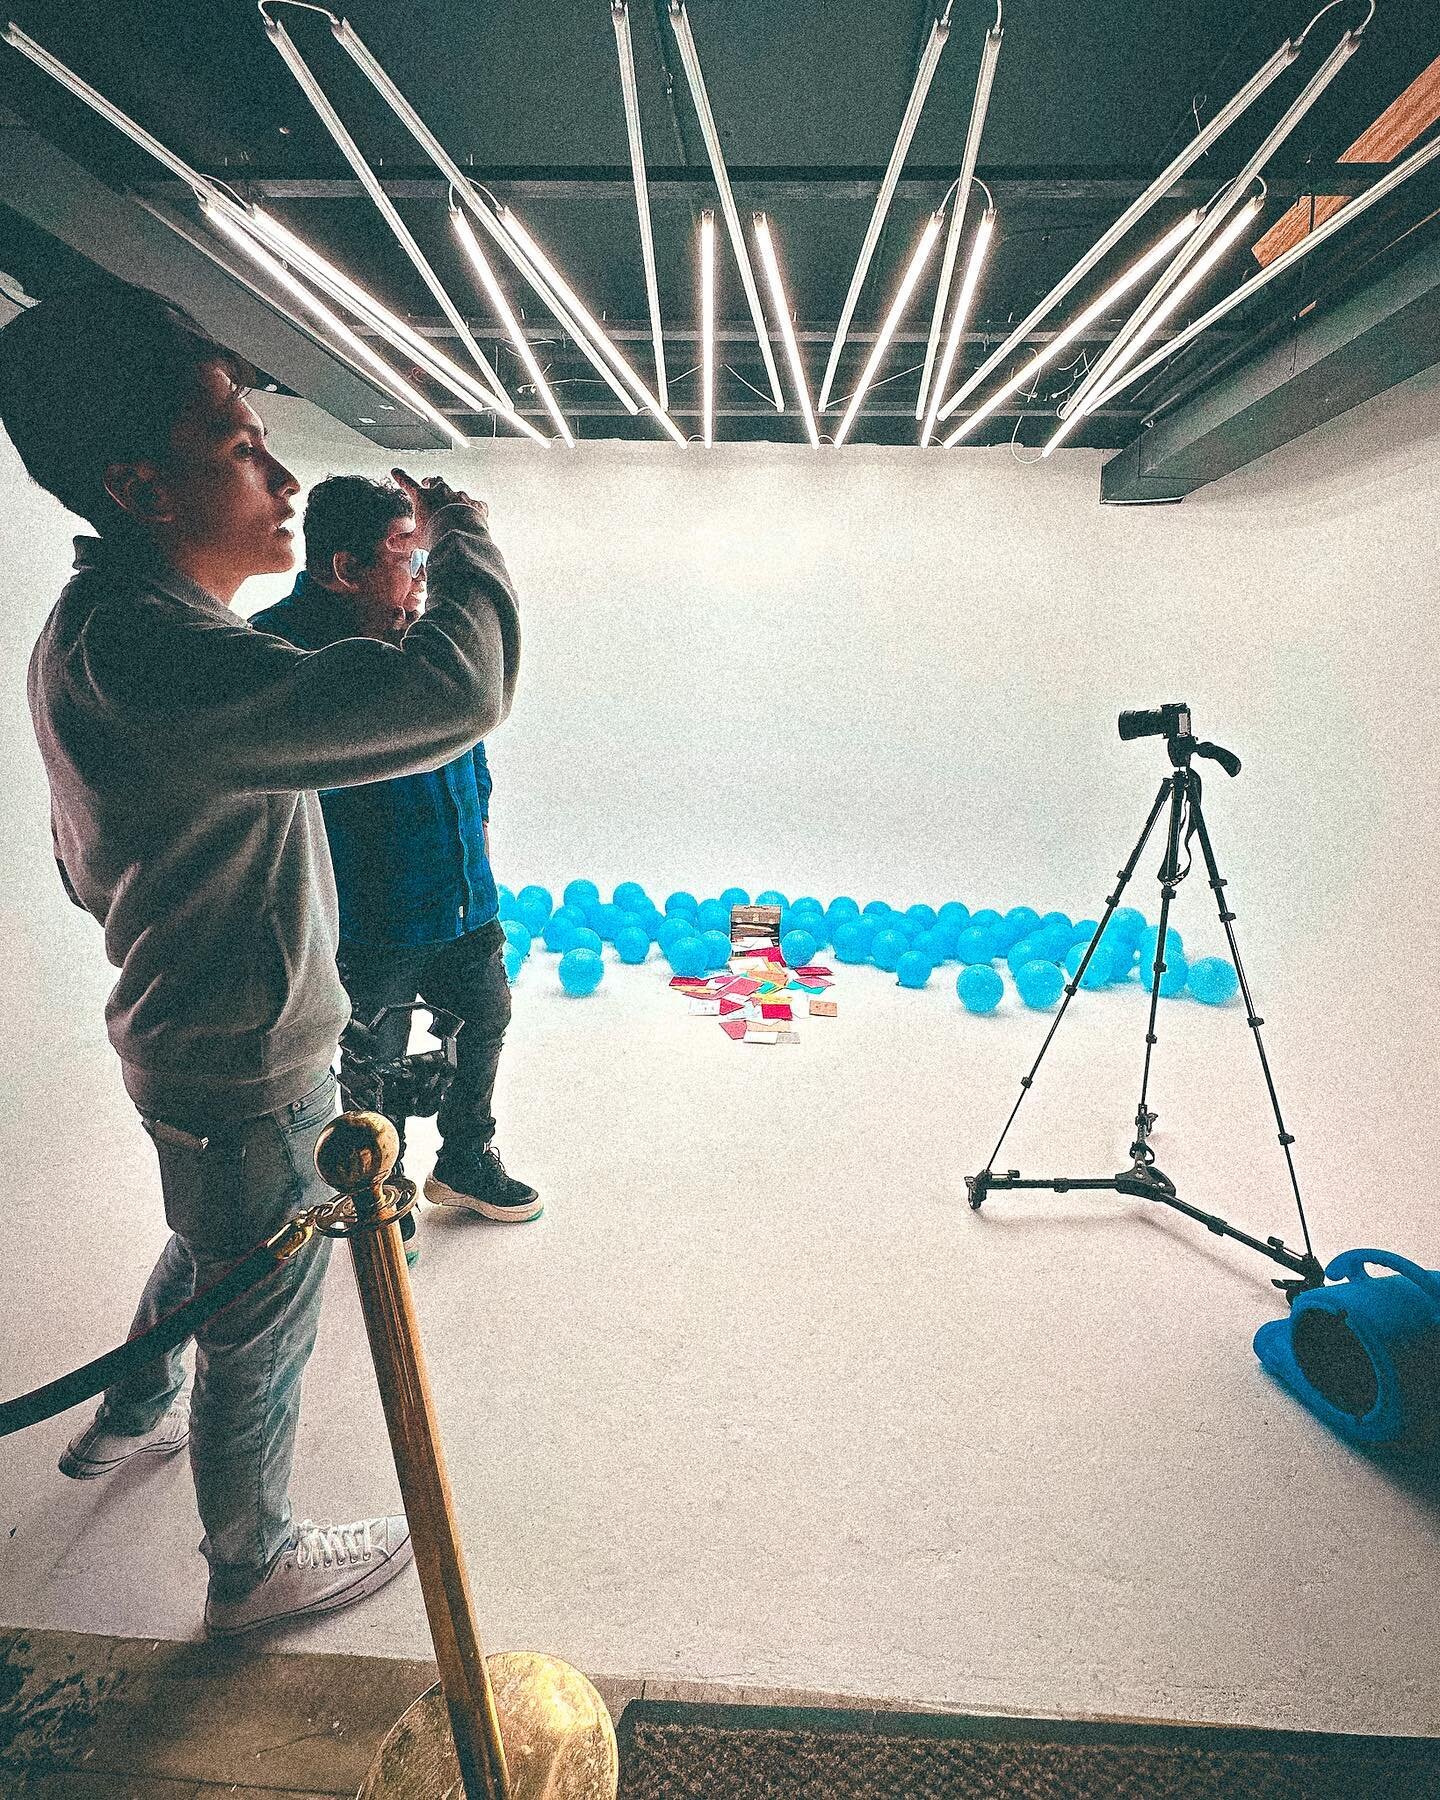 Bringing an artist&rsquo;s vision to life 🎞️🔵
.
.
Check out the outcome &amp; full video on @arzunvsm page!
.
.
.
.
#videoshoot #musicvideo #chicago #bts #minamalism #artist #creative #createexplore